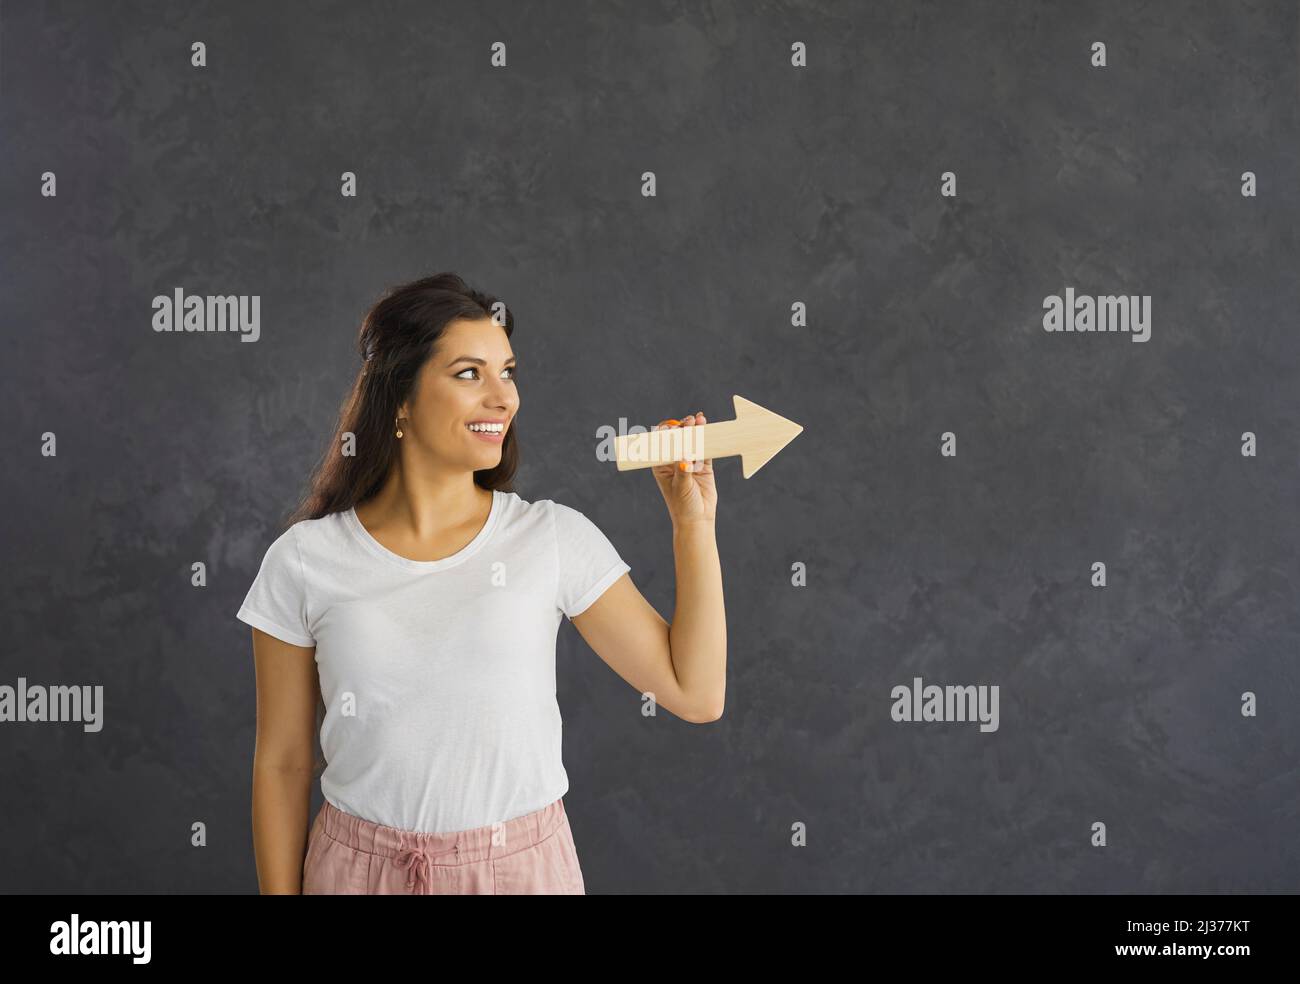 Young caucasian woman standing on a gray background holding a wooden arrow pointing to the side. Stock Photo